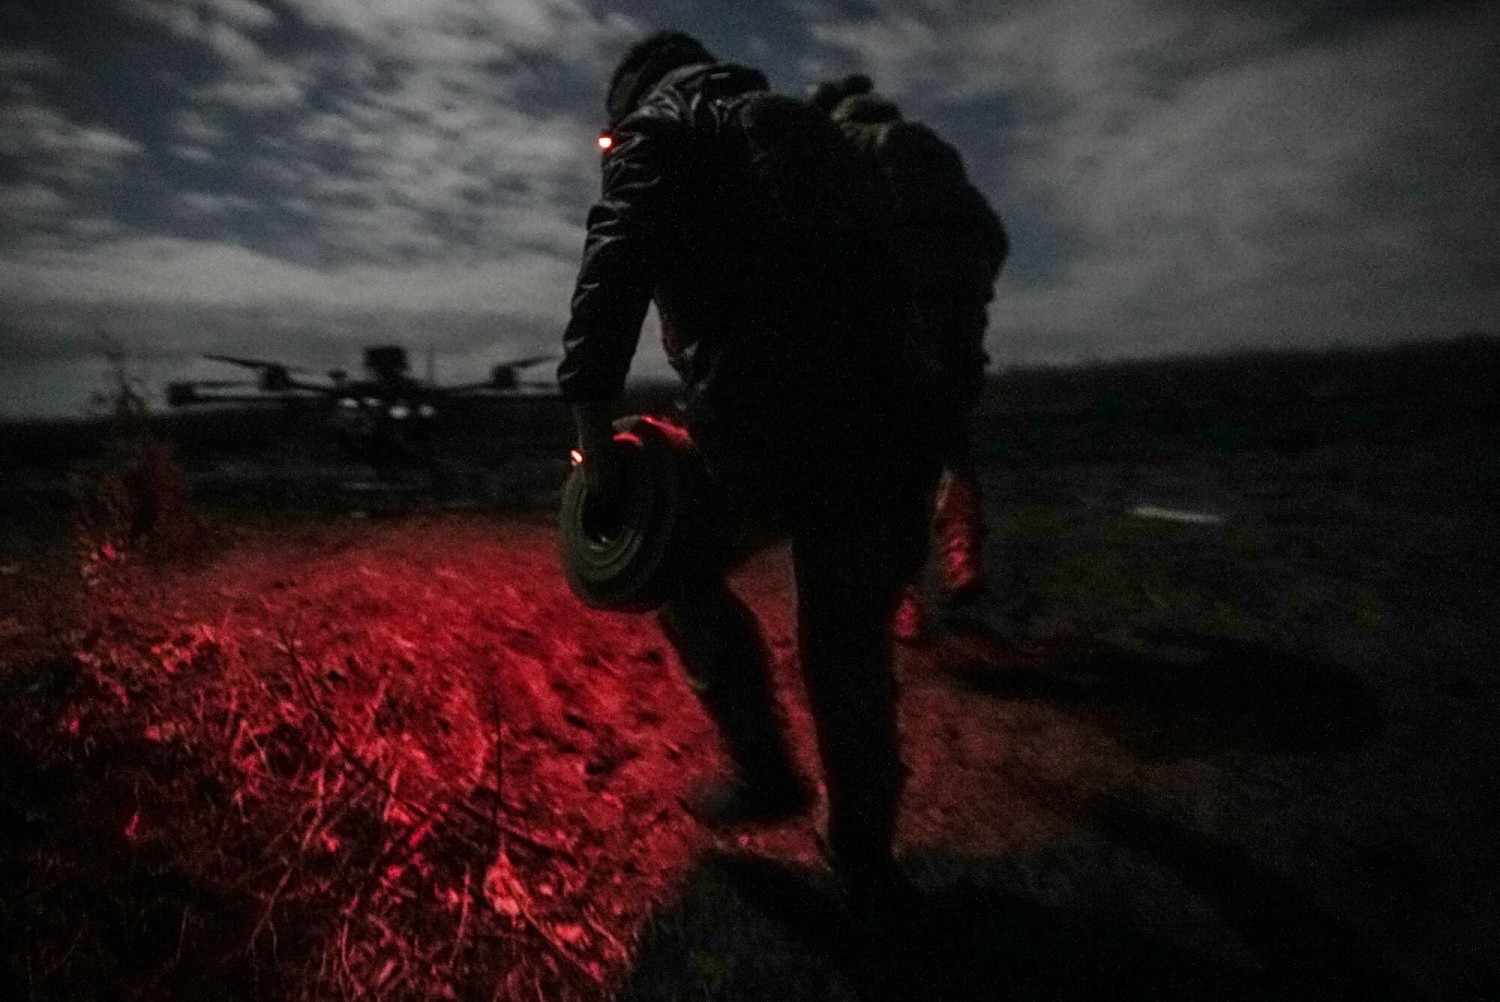 Fixing the drop on a Vampire drone during a night mission with the Code 9.2 unit at the front line near Bakhmut, Donetsk region, Ukraine, on Oct. 28.Photographer: Julia Kochetova